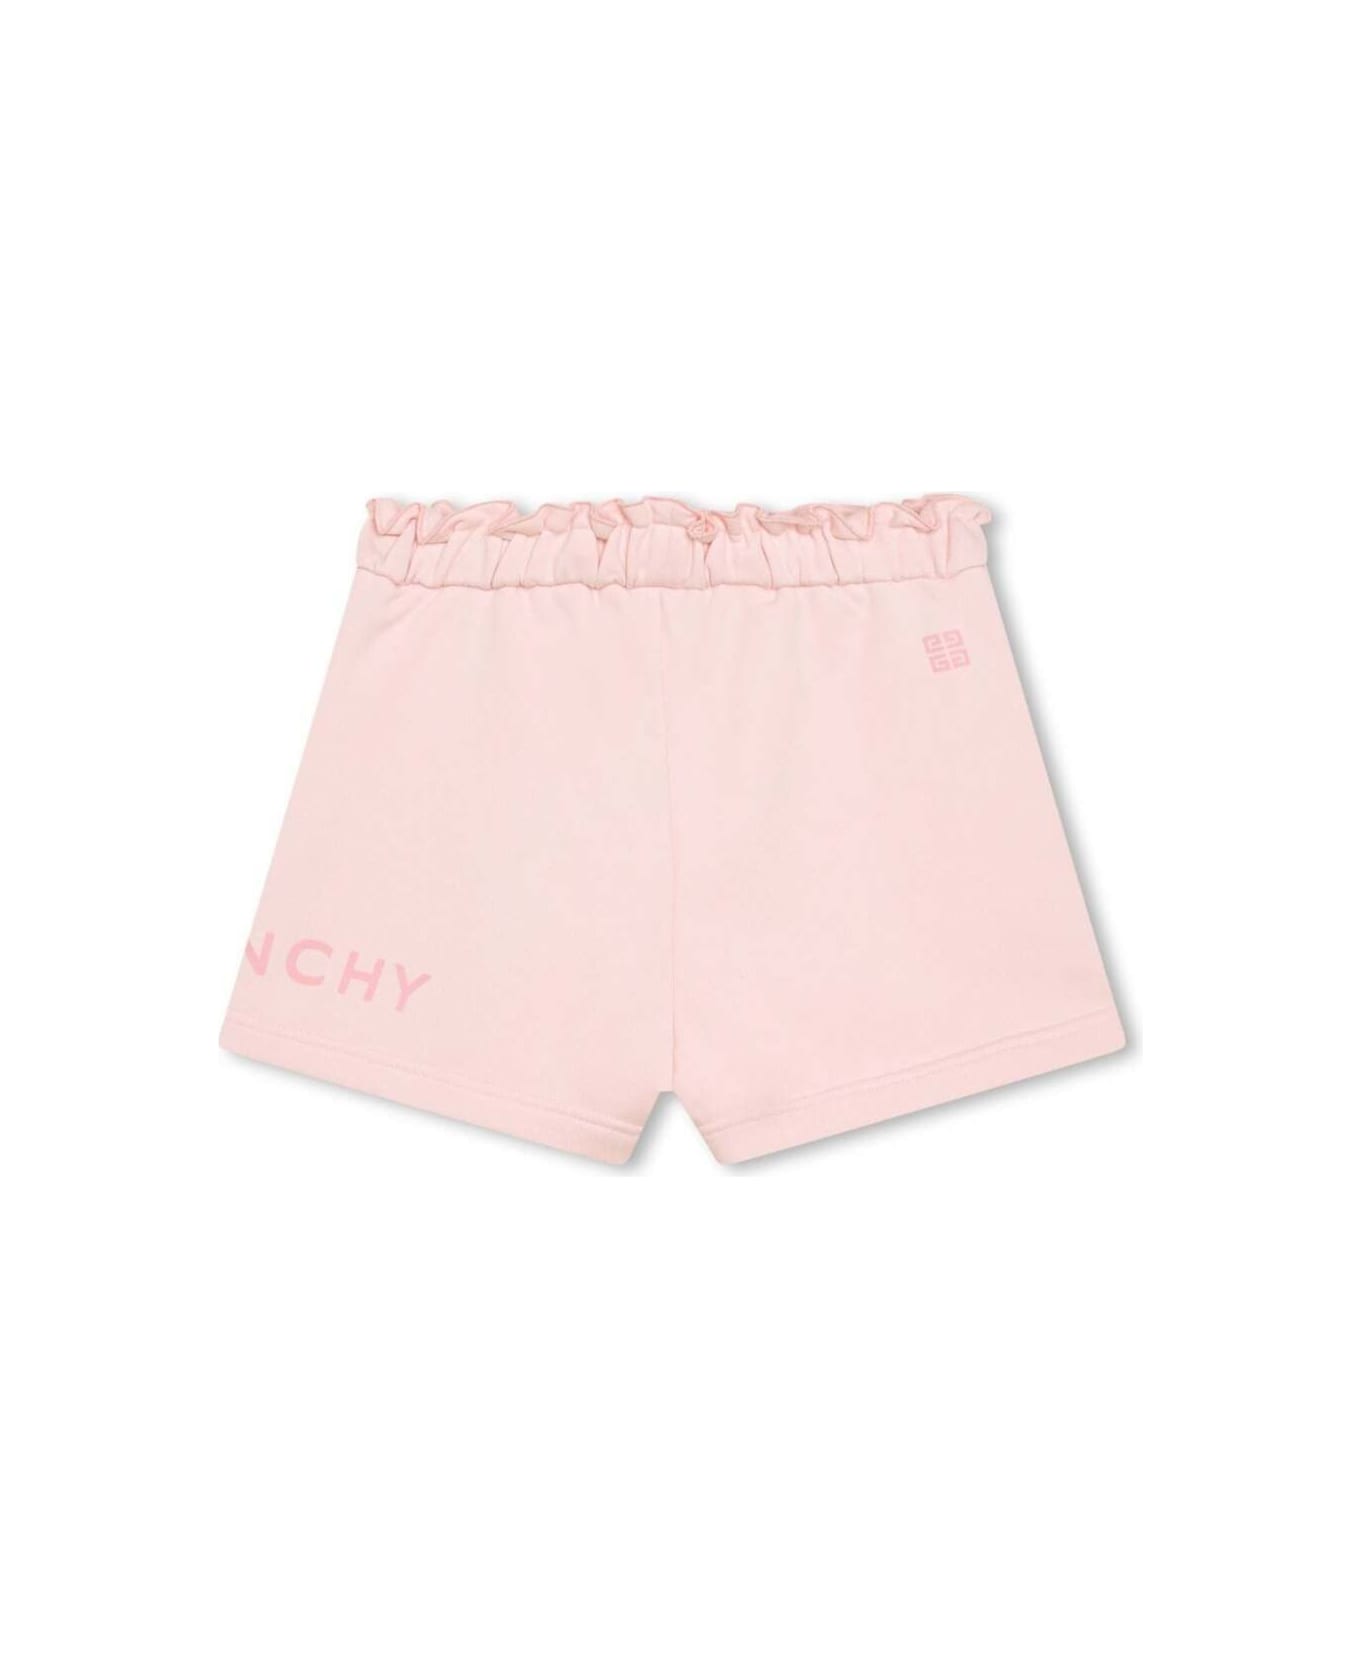 Givenchy Pink Shorts With Elastic Waistband And Logo In Cotton Blend Girl - Pink